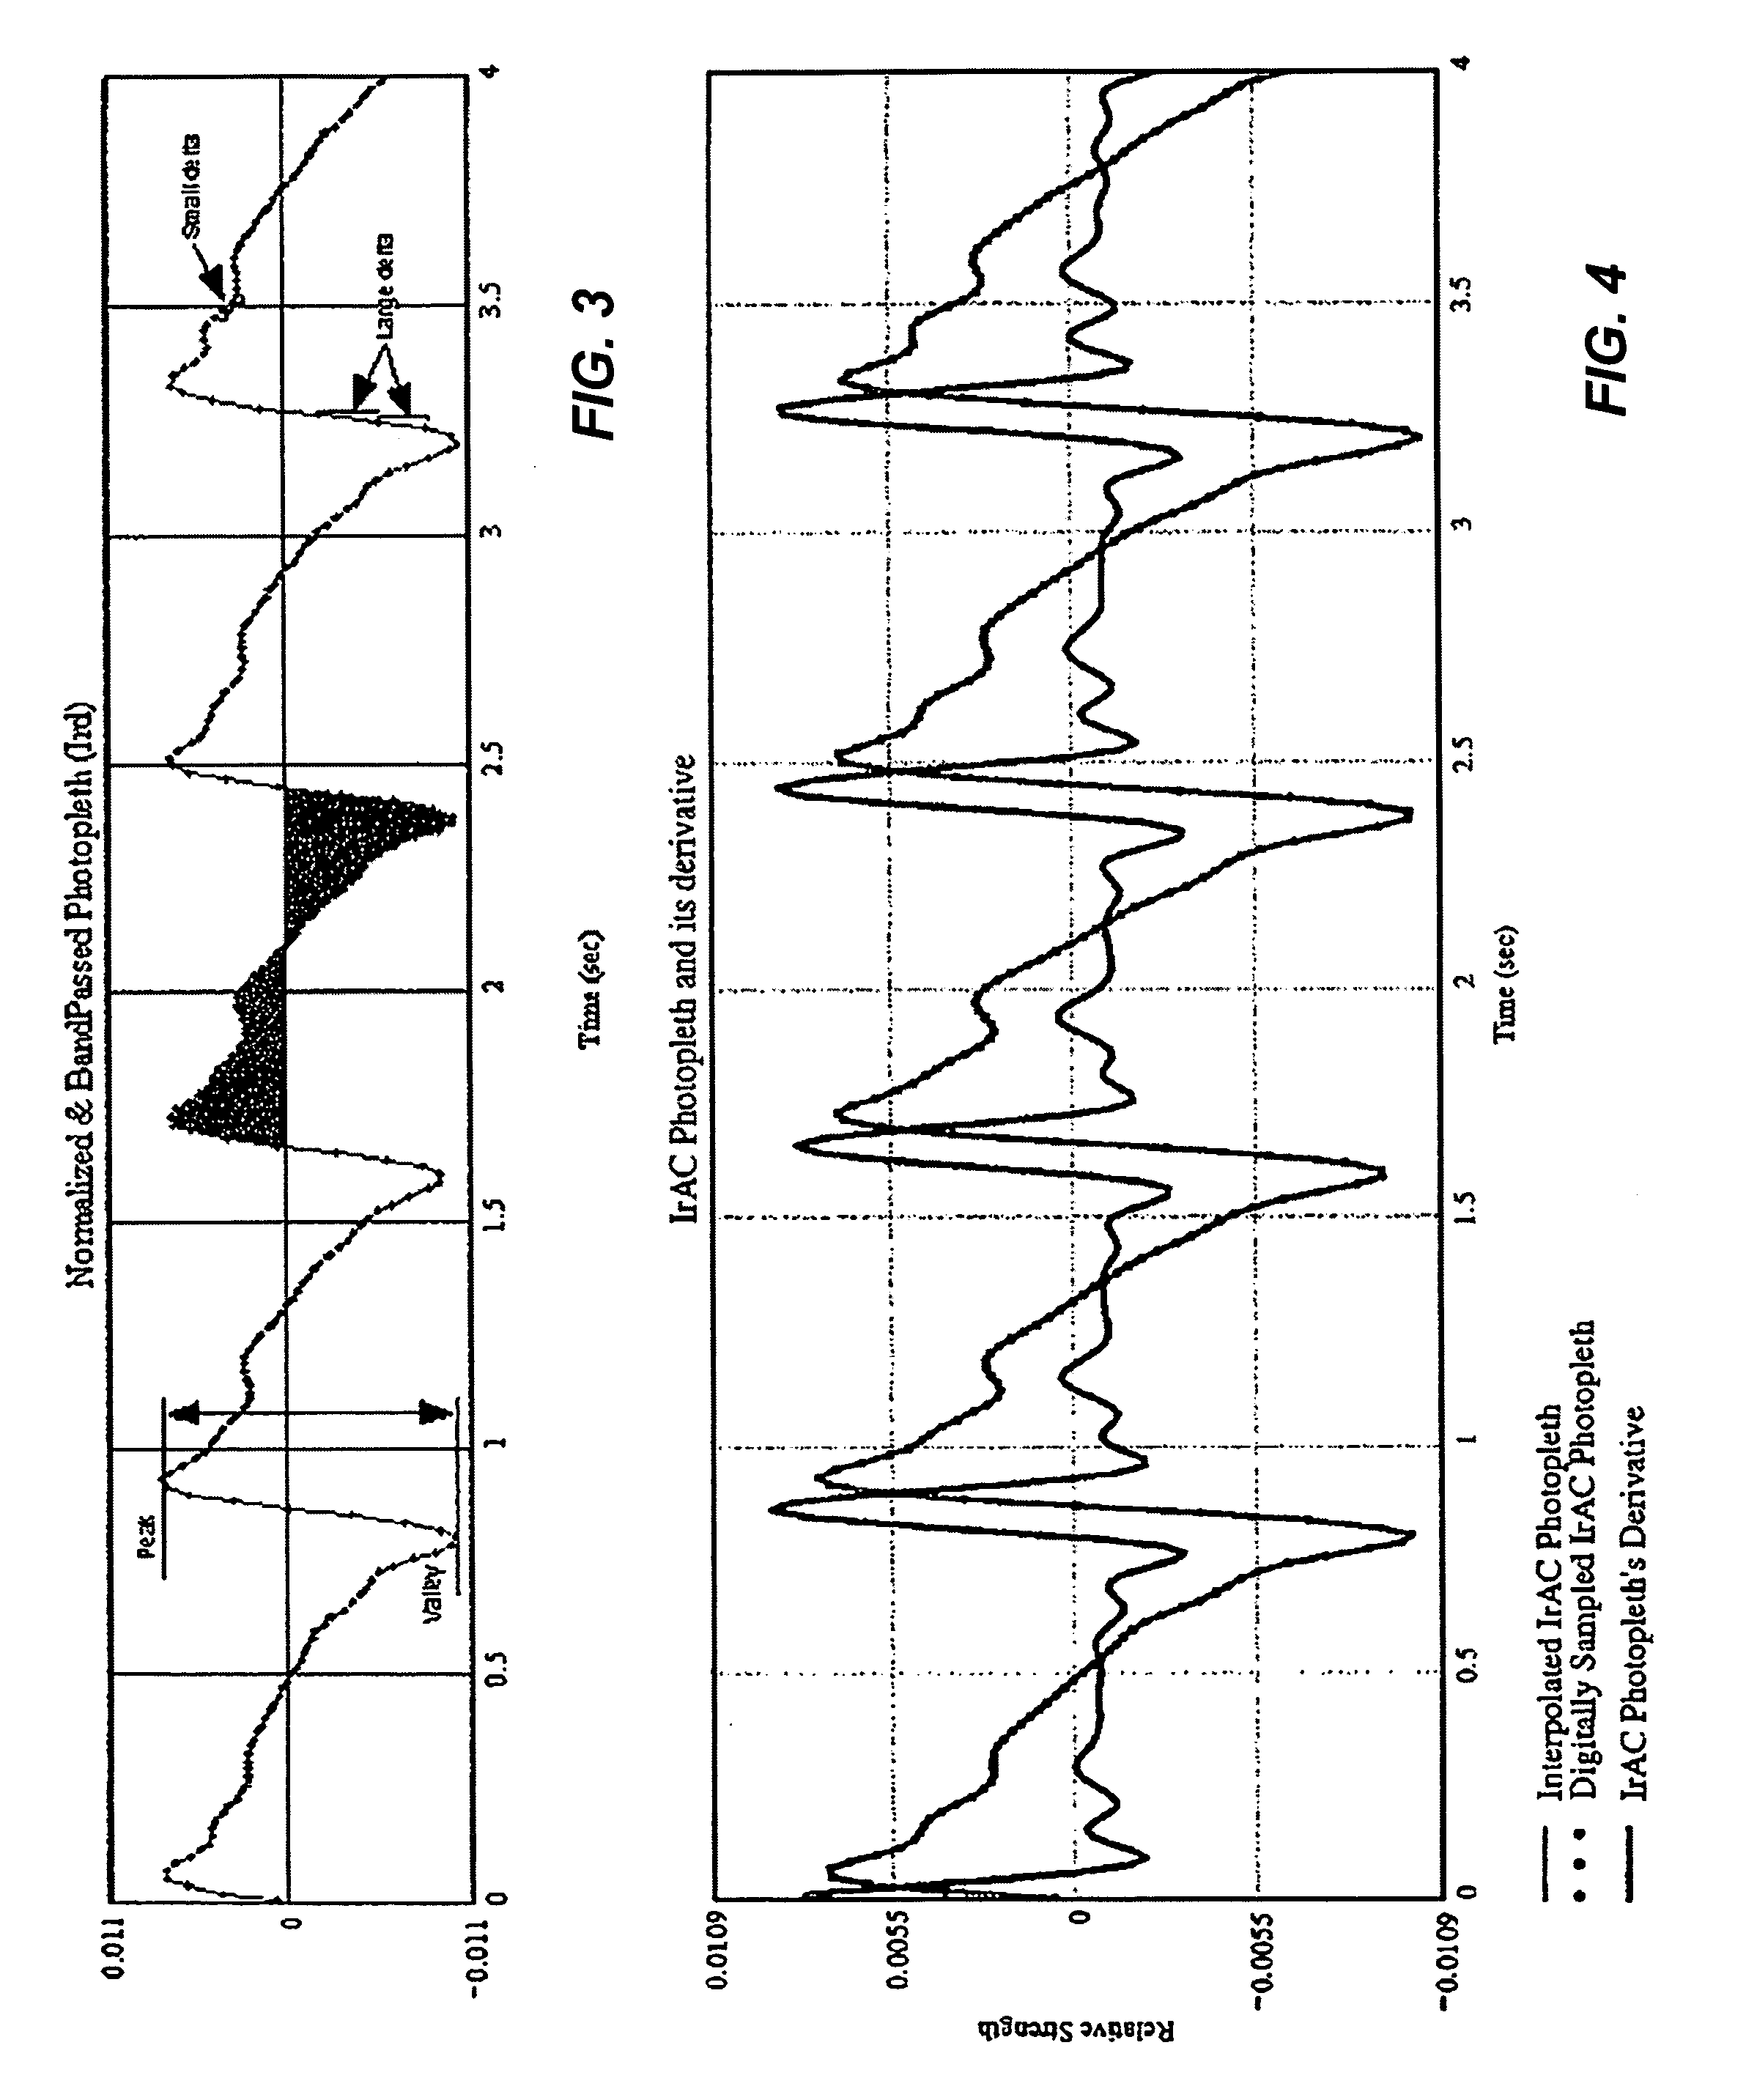 Systems and methods for determining blood oxygen saturation values using complex number encoding